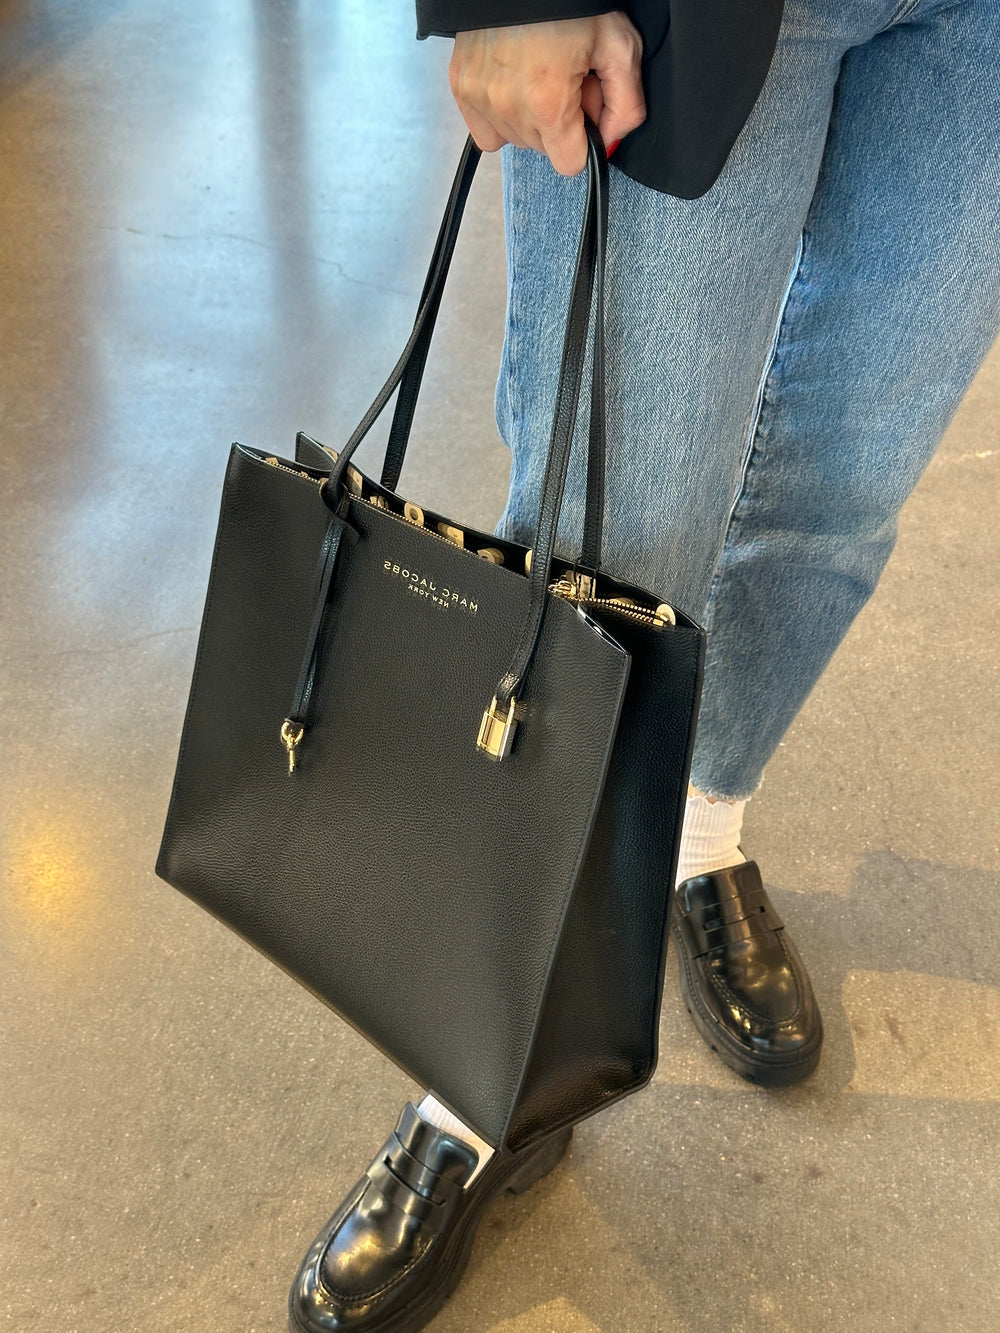 Marc Jacobs The Leather Large Tote Bag